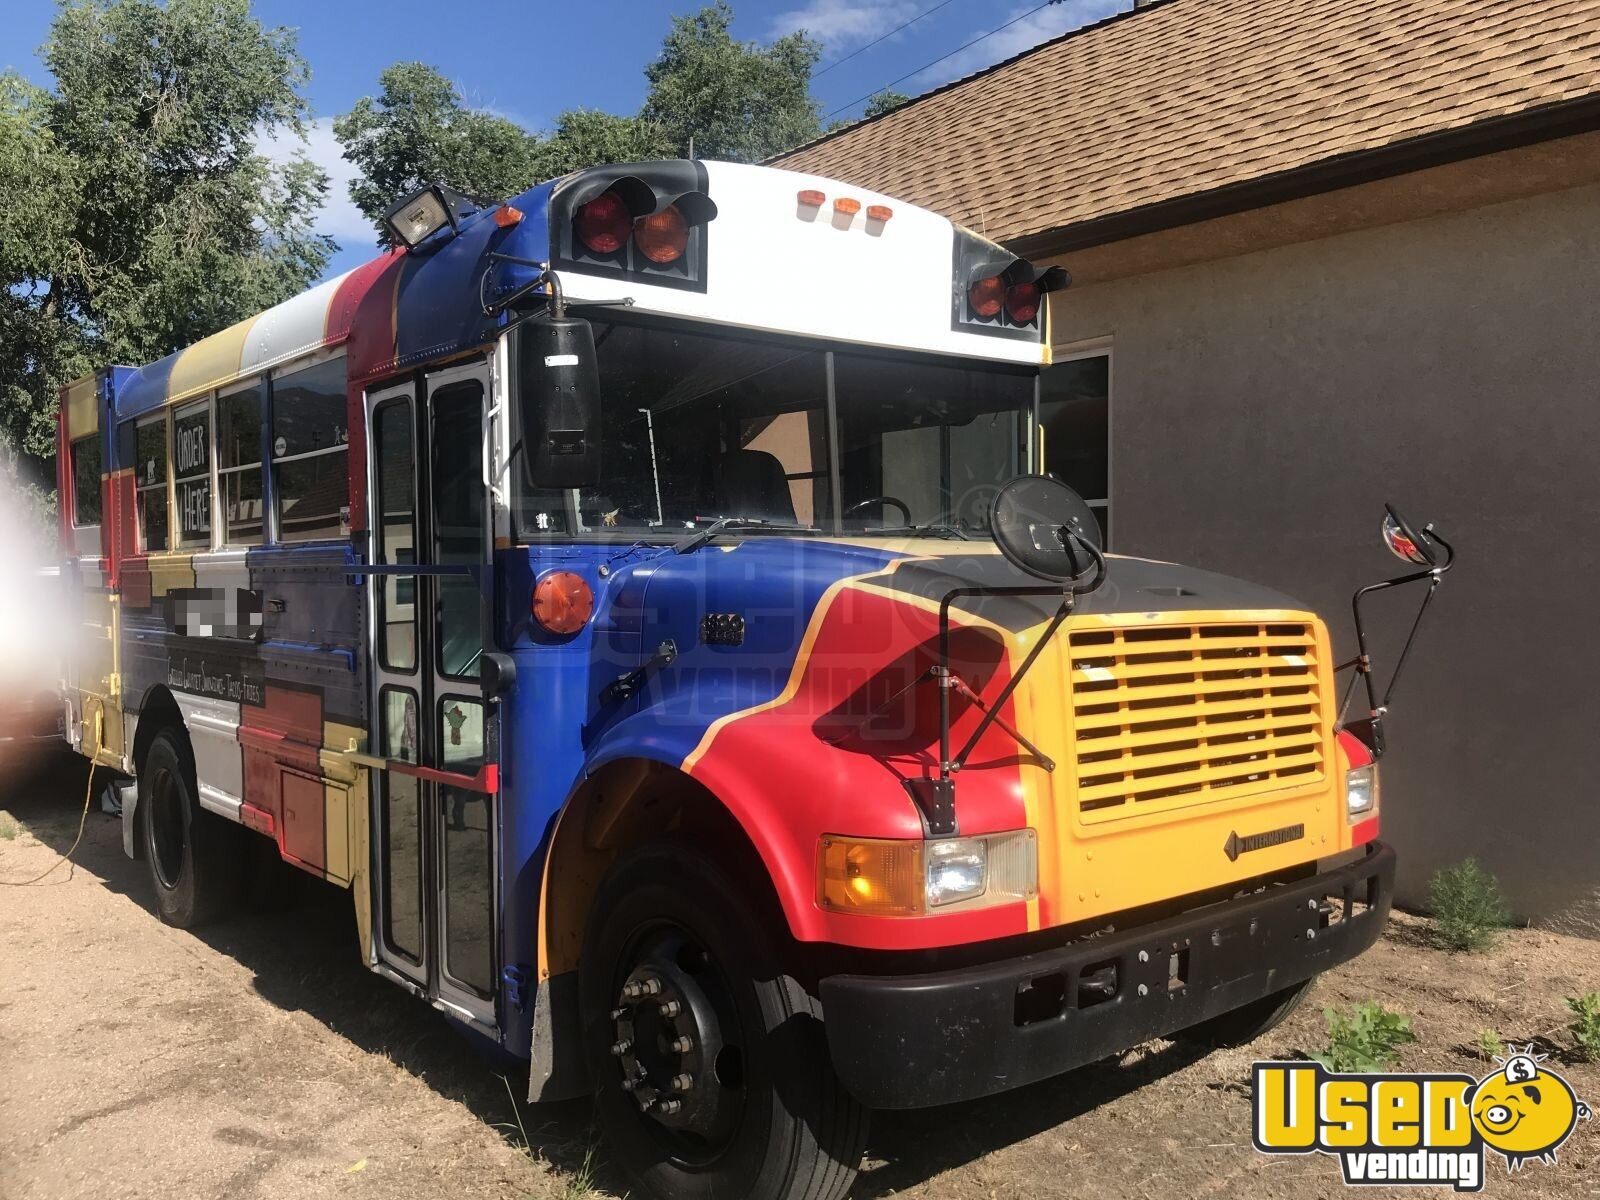 How to convert a school bus into a food truck 2000 International 3800 T444e Bus Food Truck Mobile Kitchen Unit Used Mobile Food Unit For Sale In Colorado